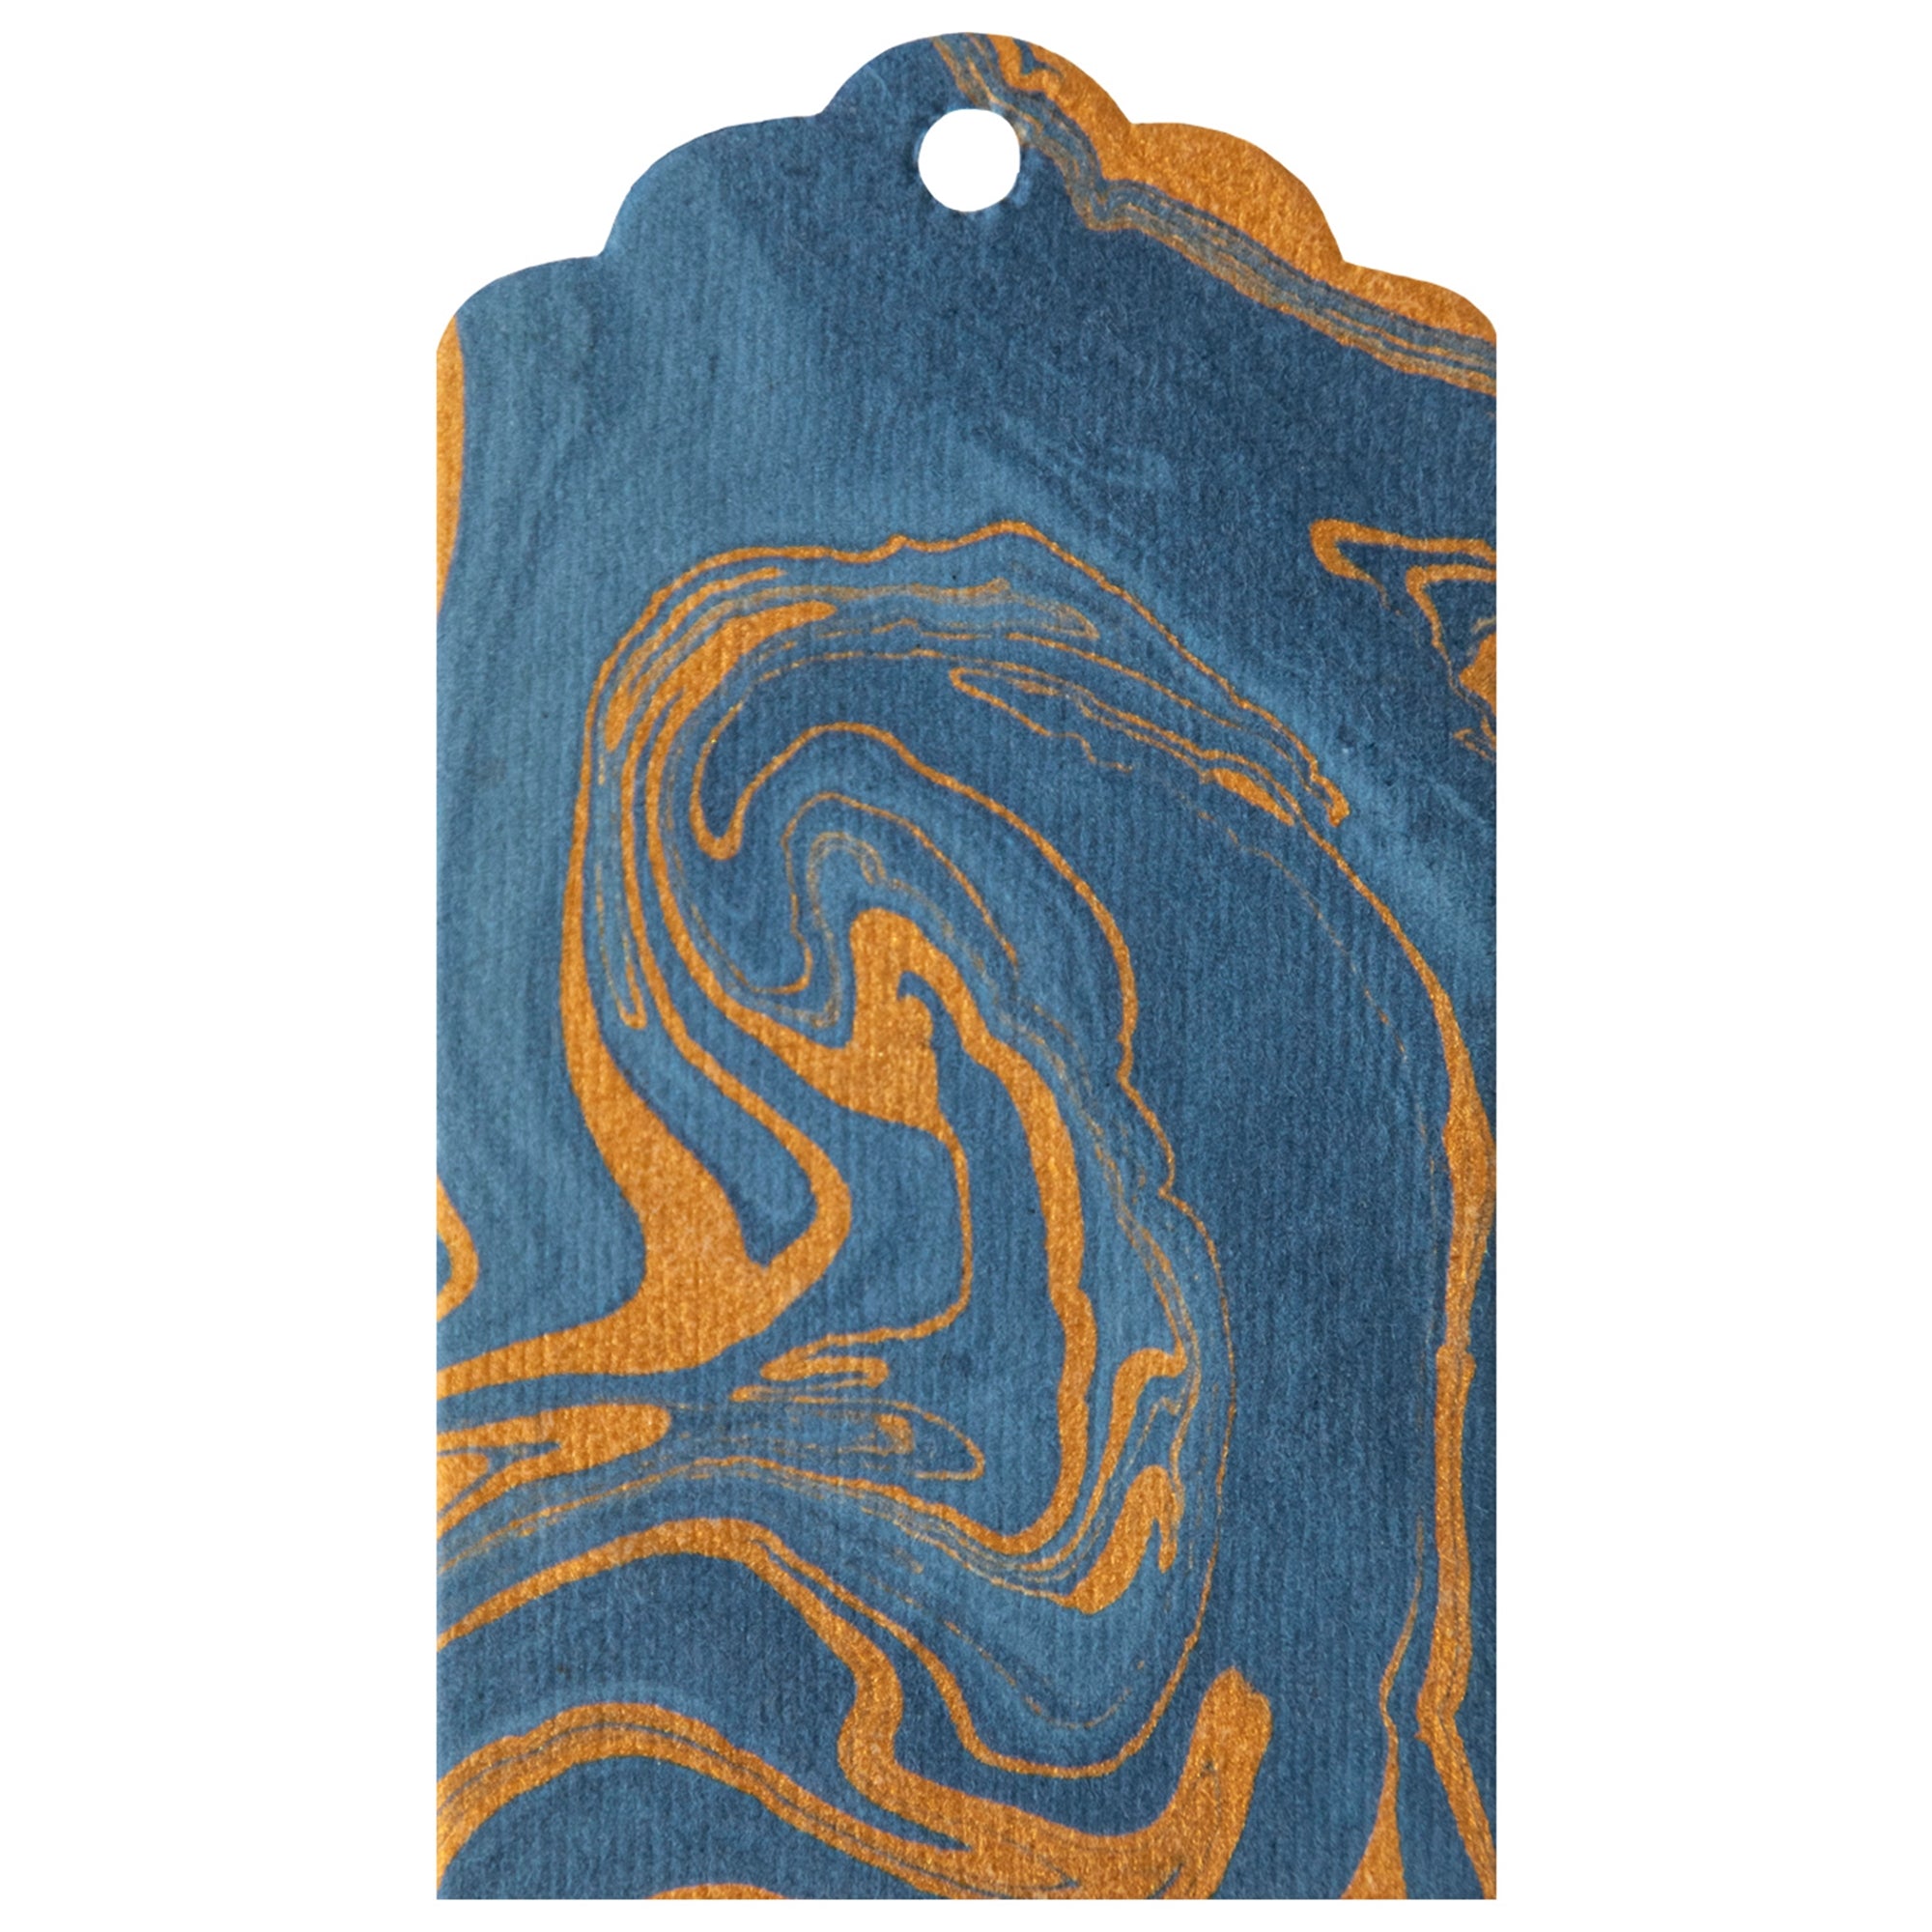 Hester & Cook Blue & Gold Veined Marbled Placemats & Tags